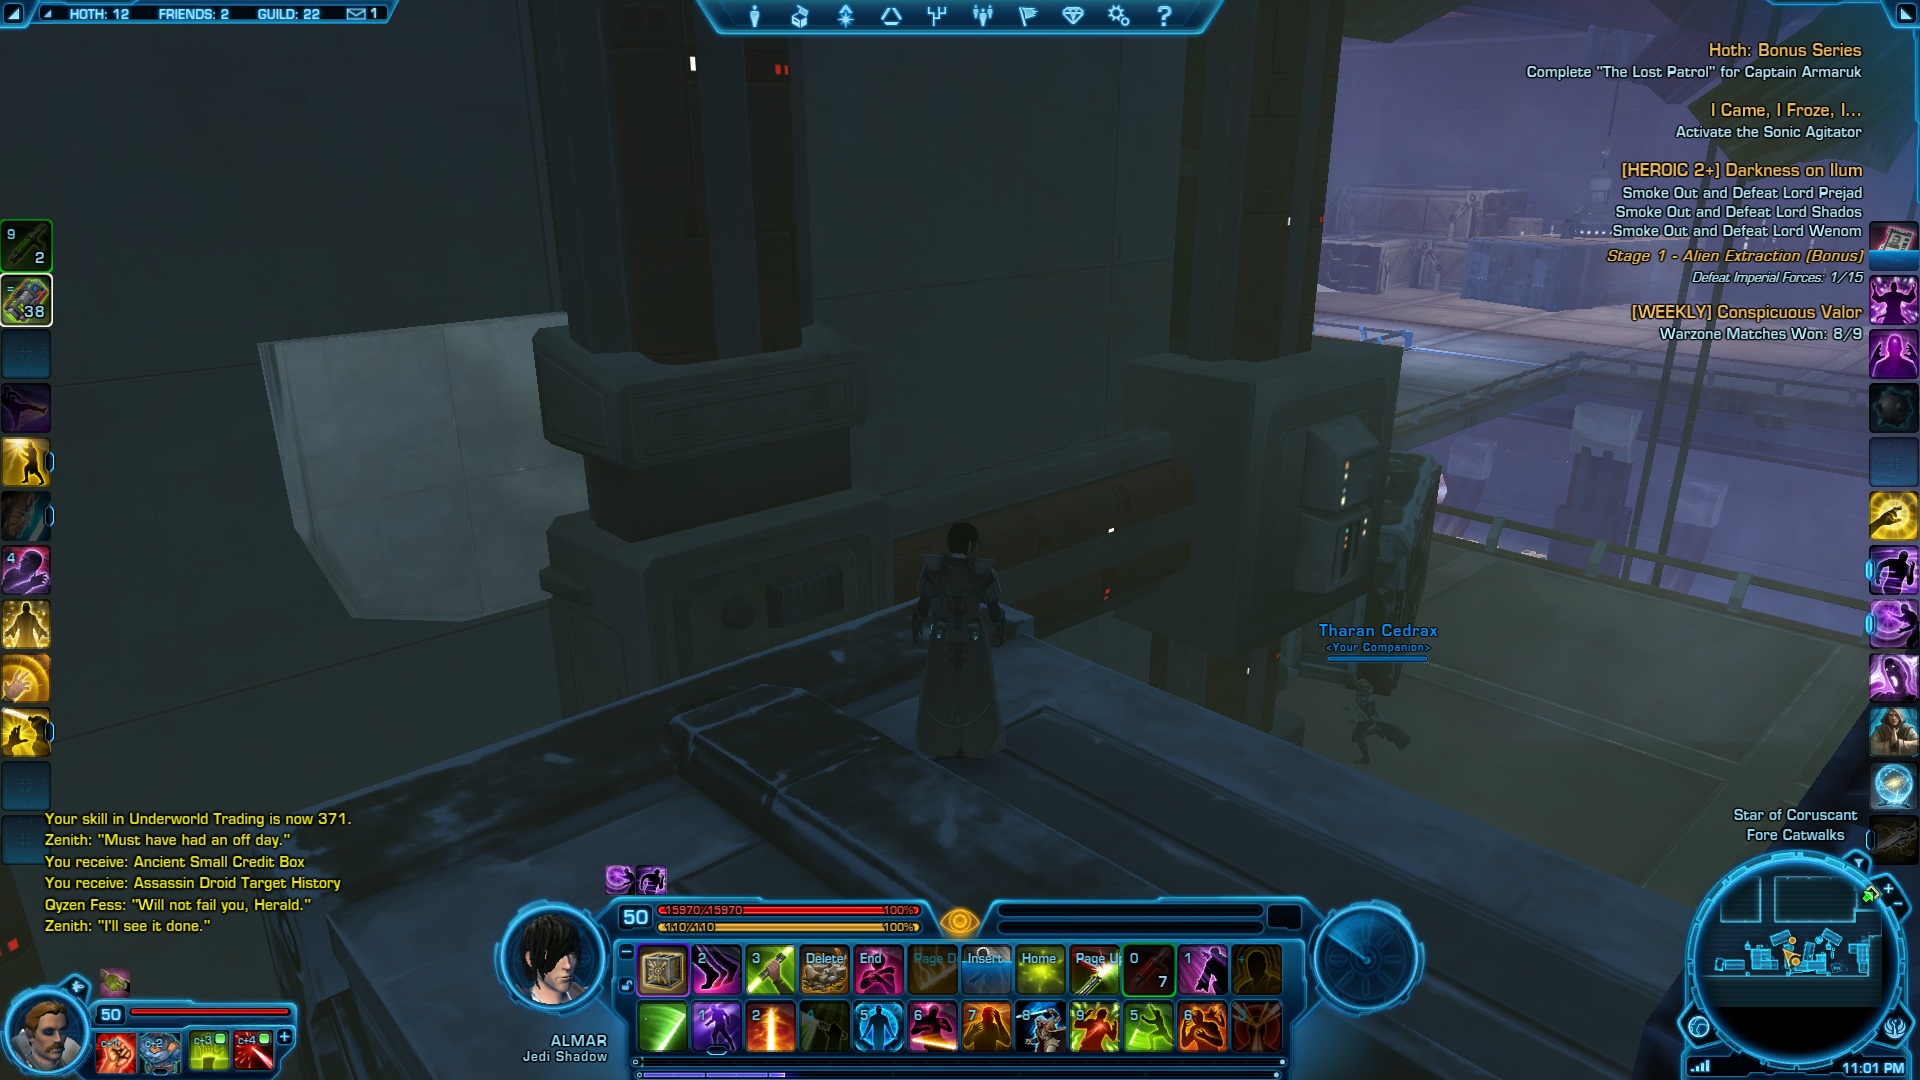 Hoth Cunning Datacron Hunt continued